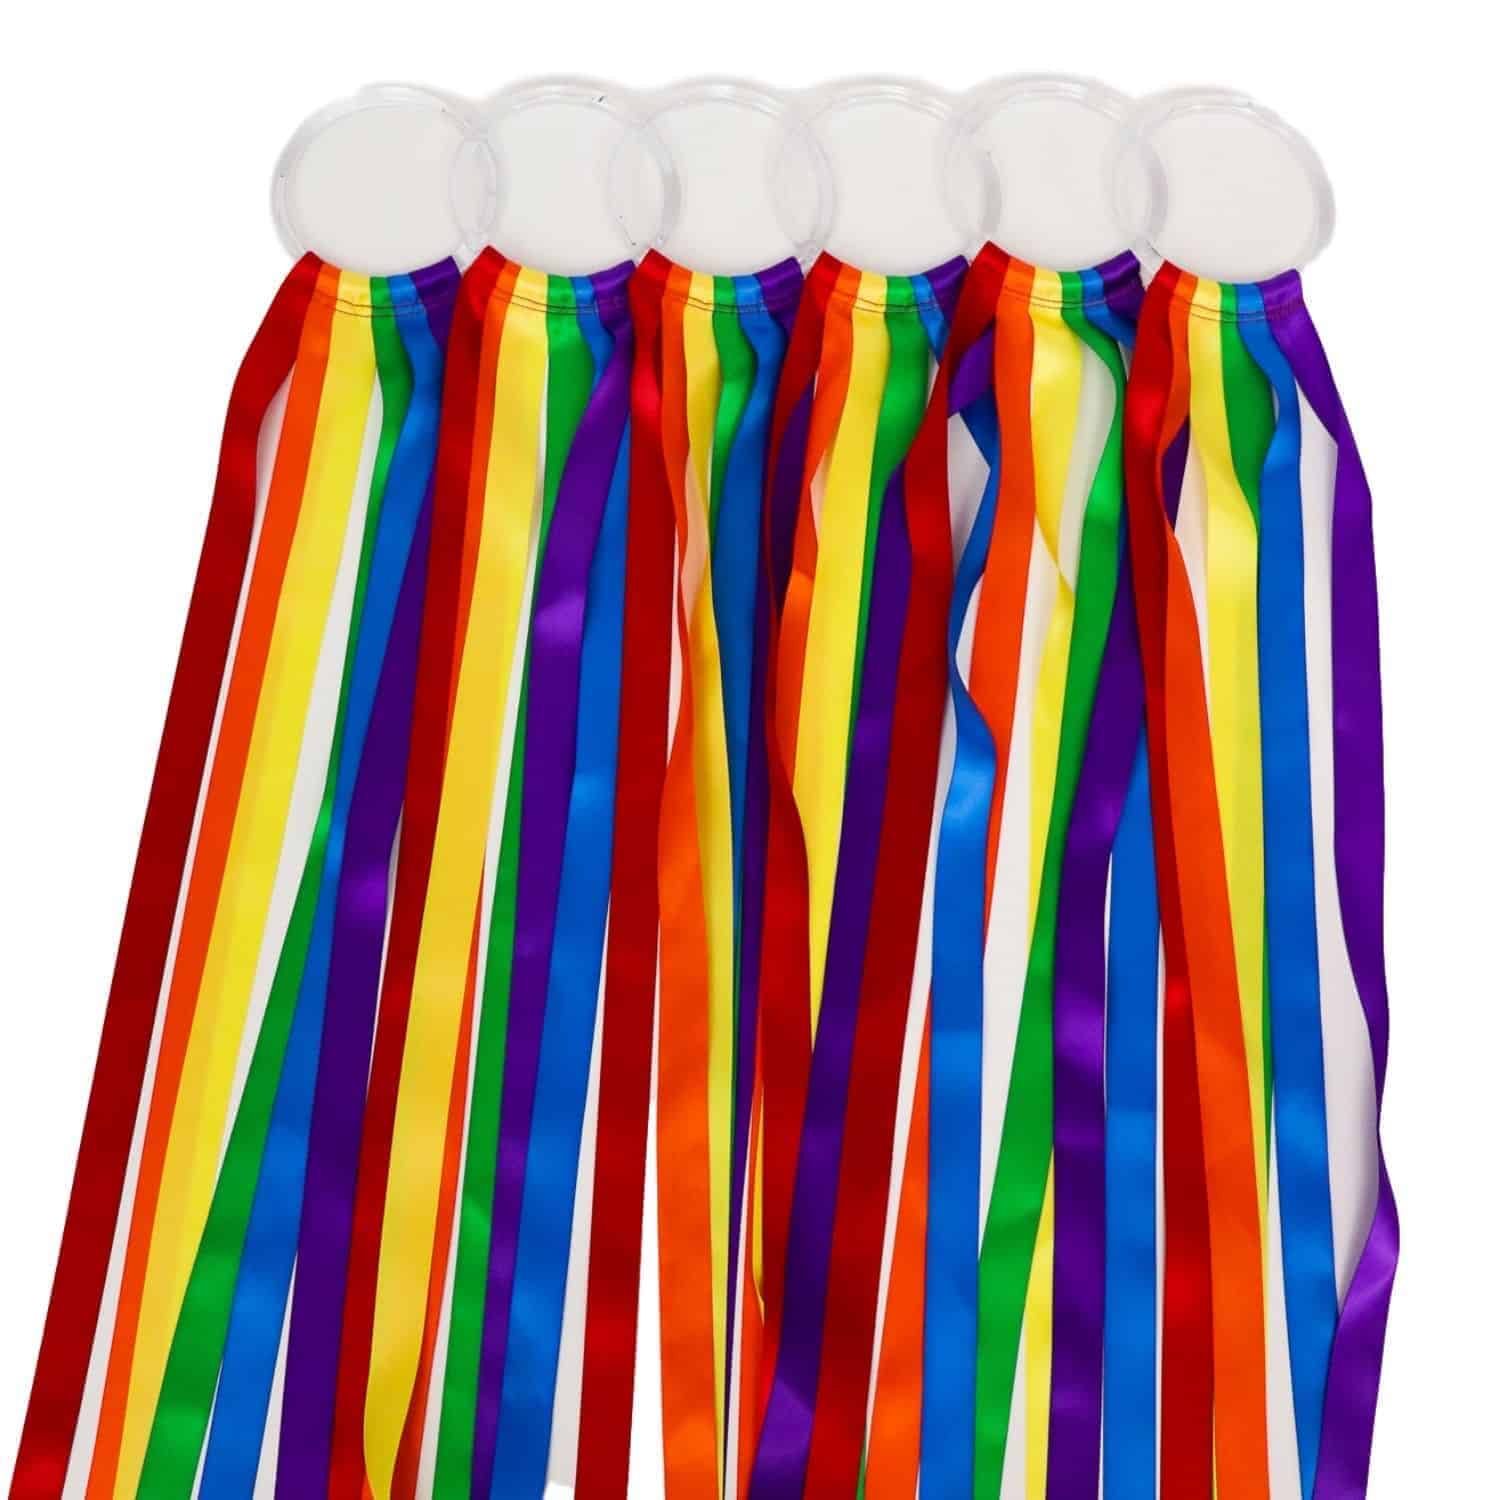 Top Music Therapy Props Hoop Ribbon Rainbow Streamers Music Education Activity Directors